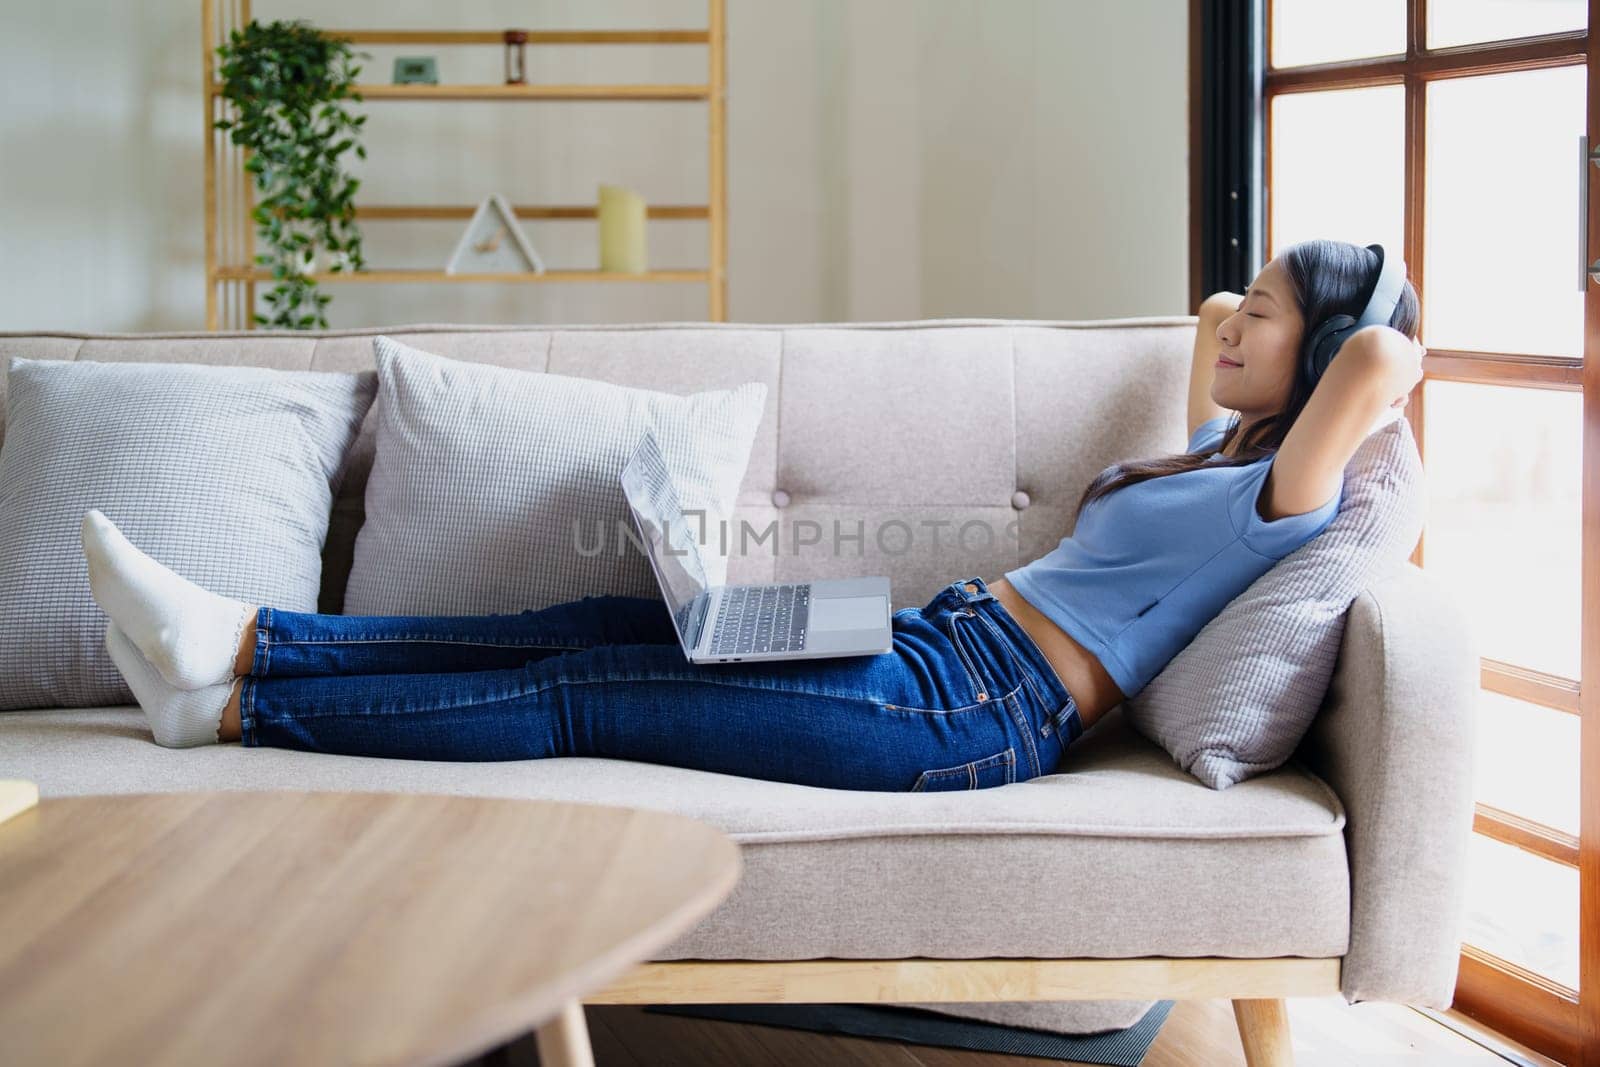 woman wearing headphones on comfortable couch listening to using computer laptop and music